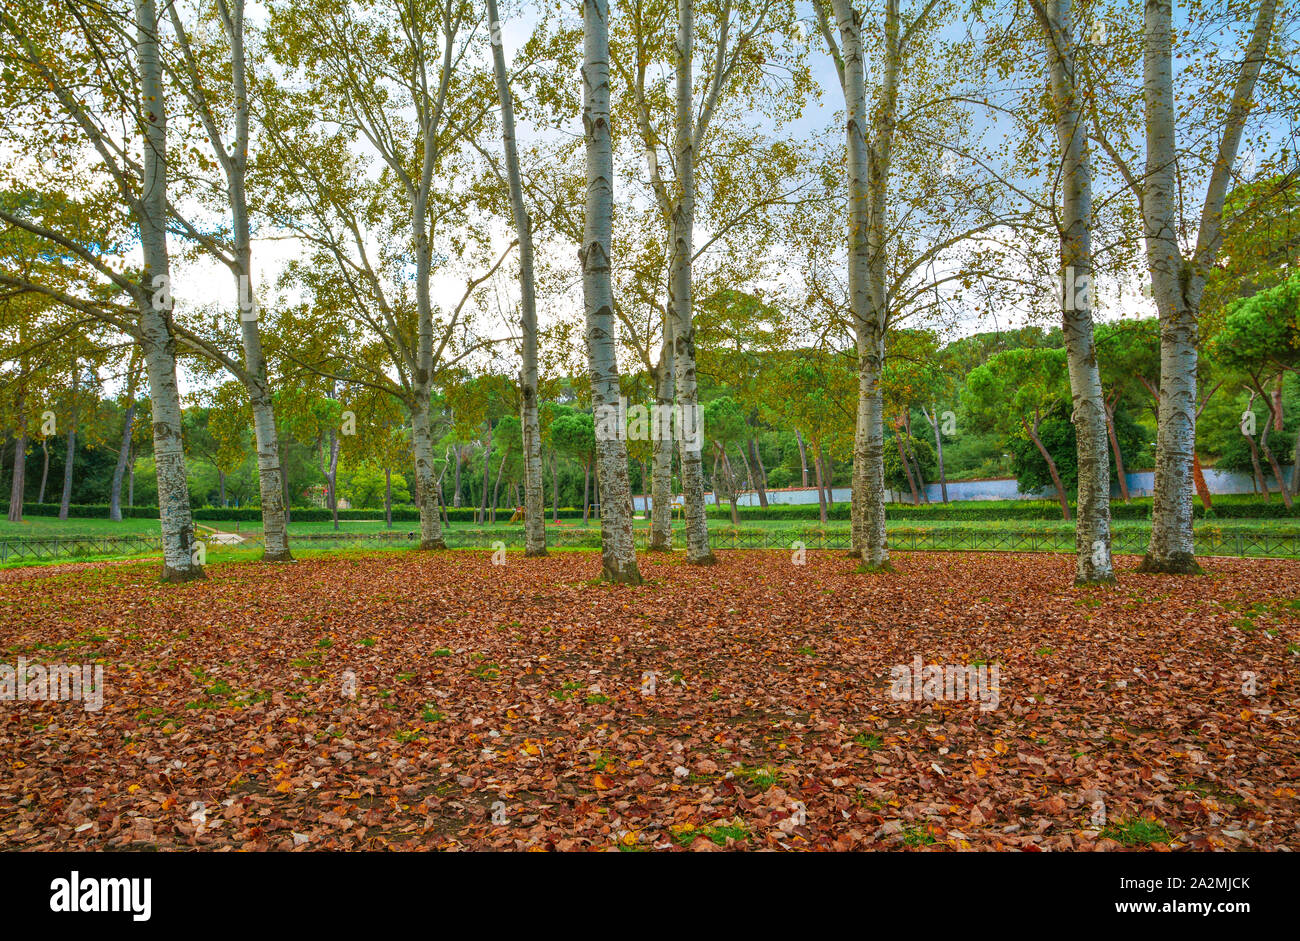 Rome (Italy) - The autumn in Villa Ada, the biggest public park in Rome with lake and forest Stock Photo